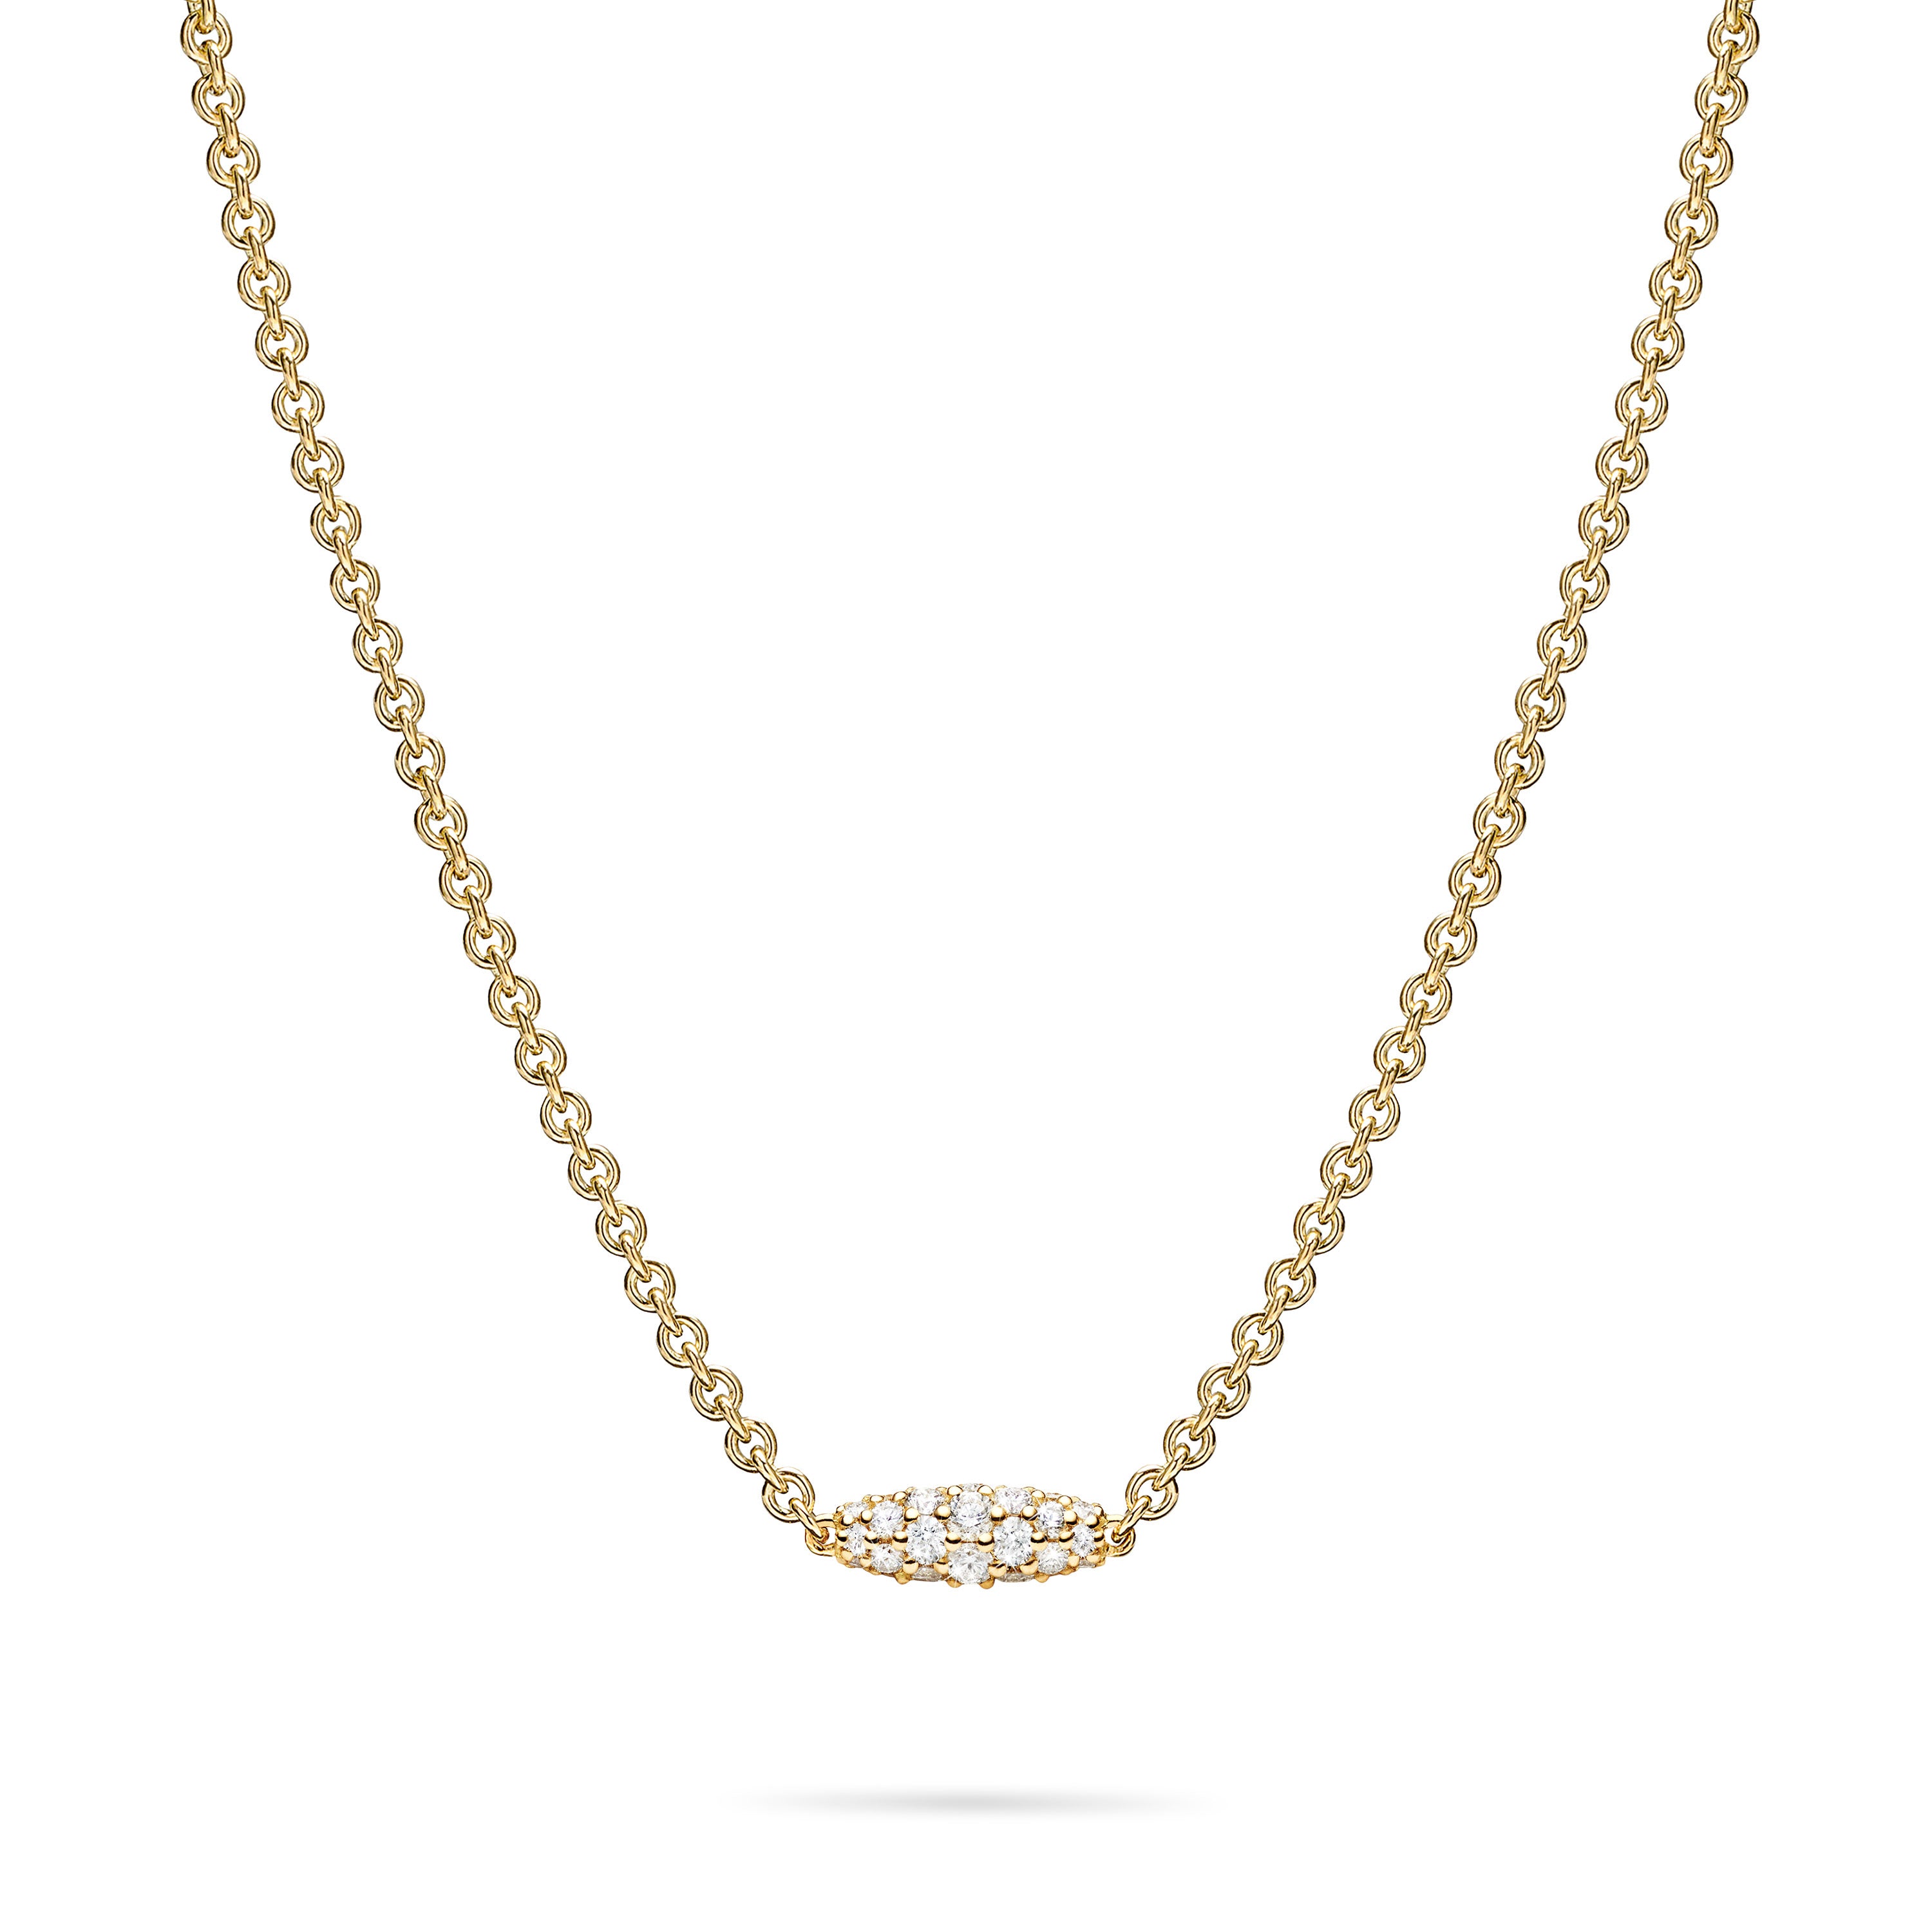 Paul Morelli Single Pipette Necklace - Be On Park